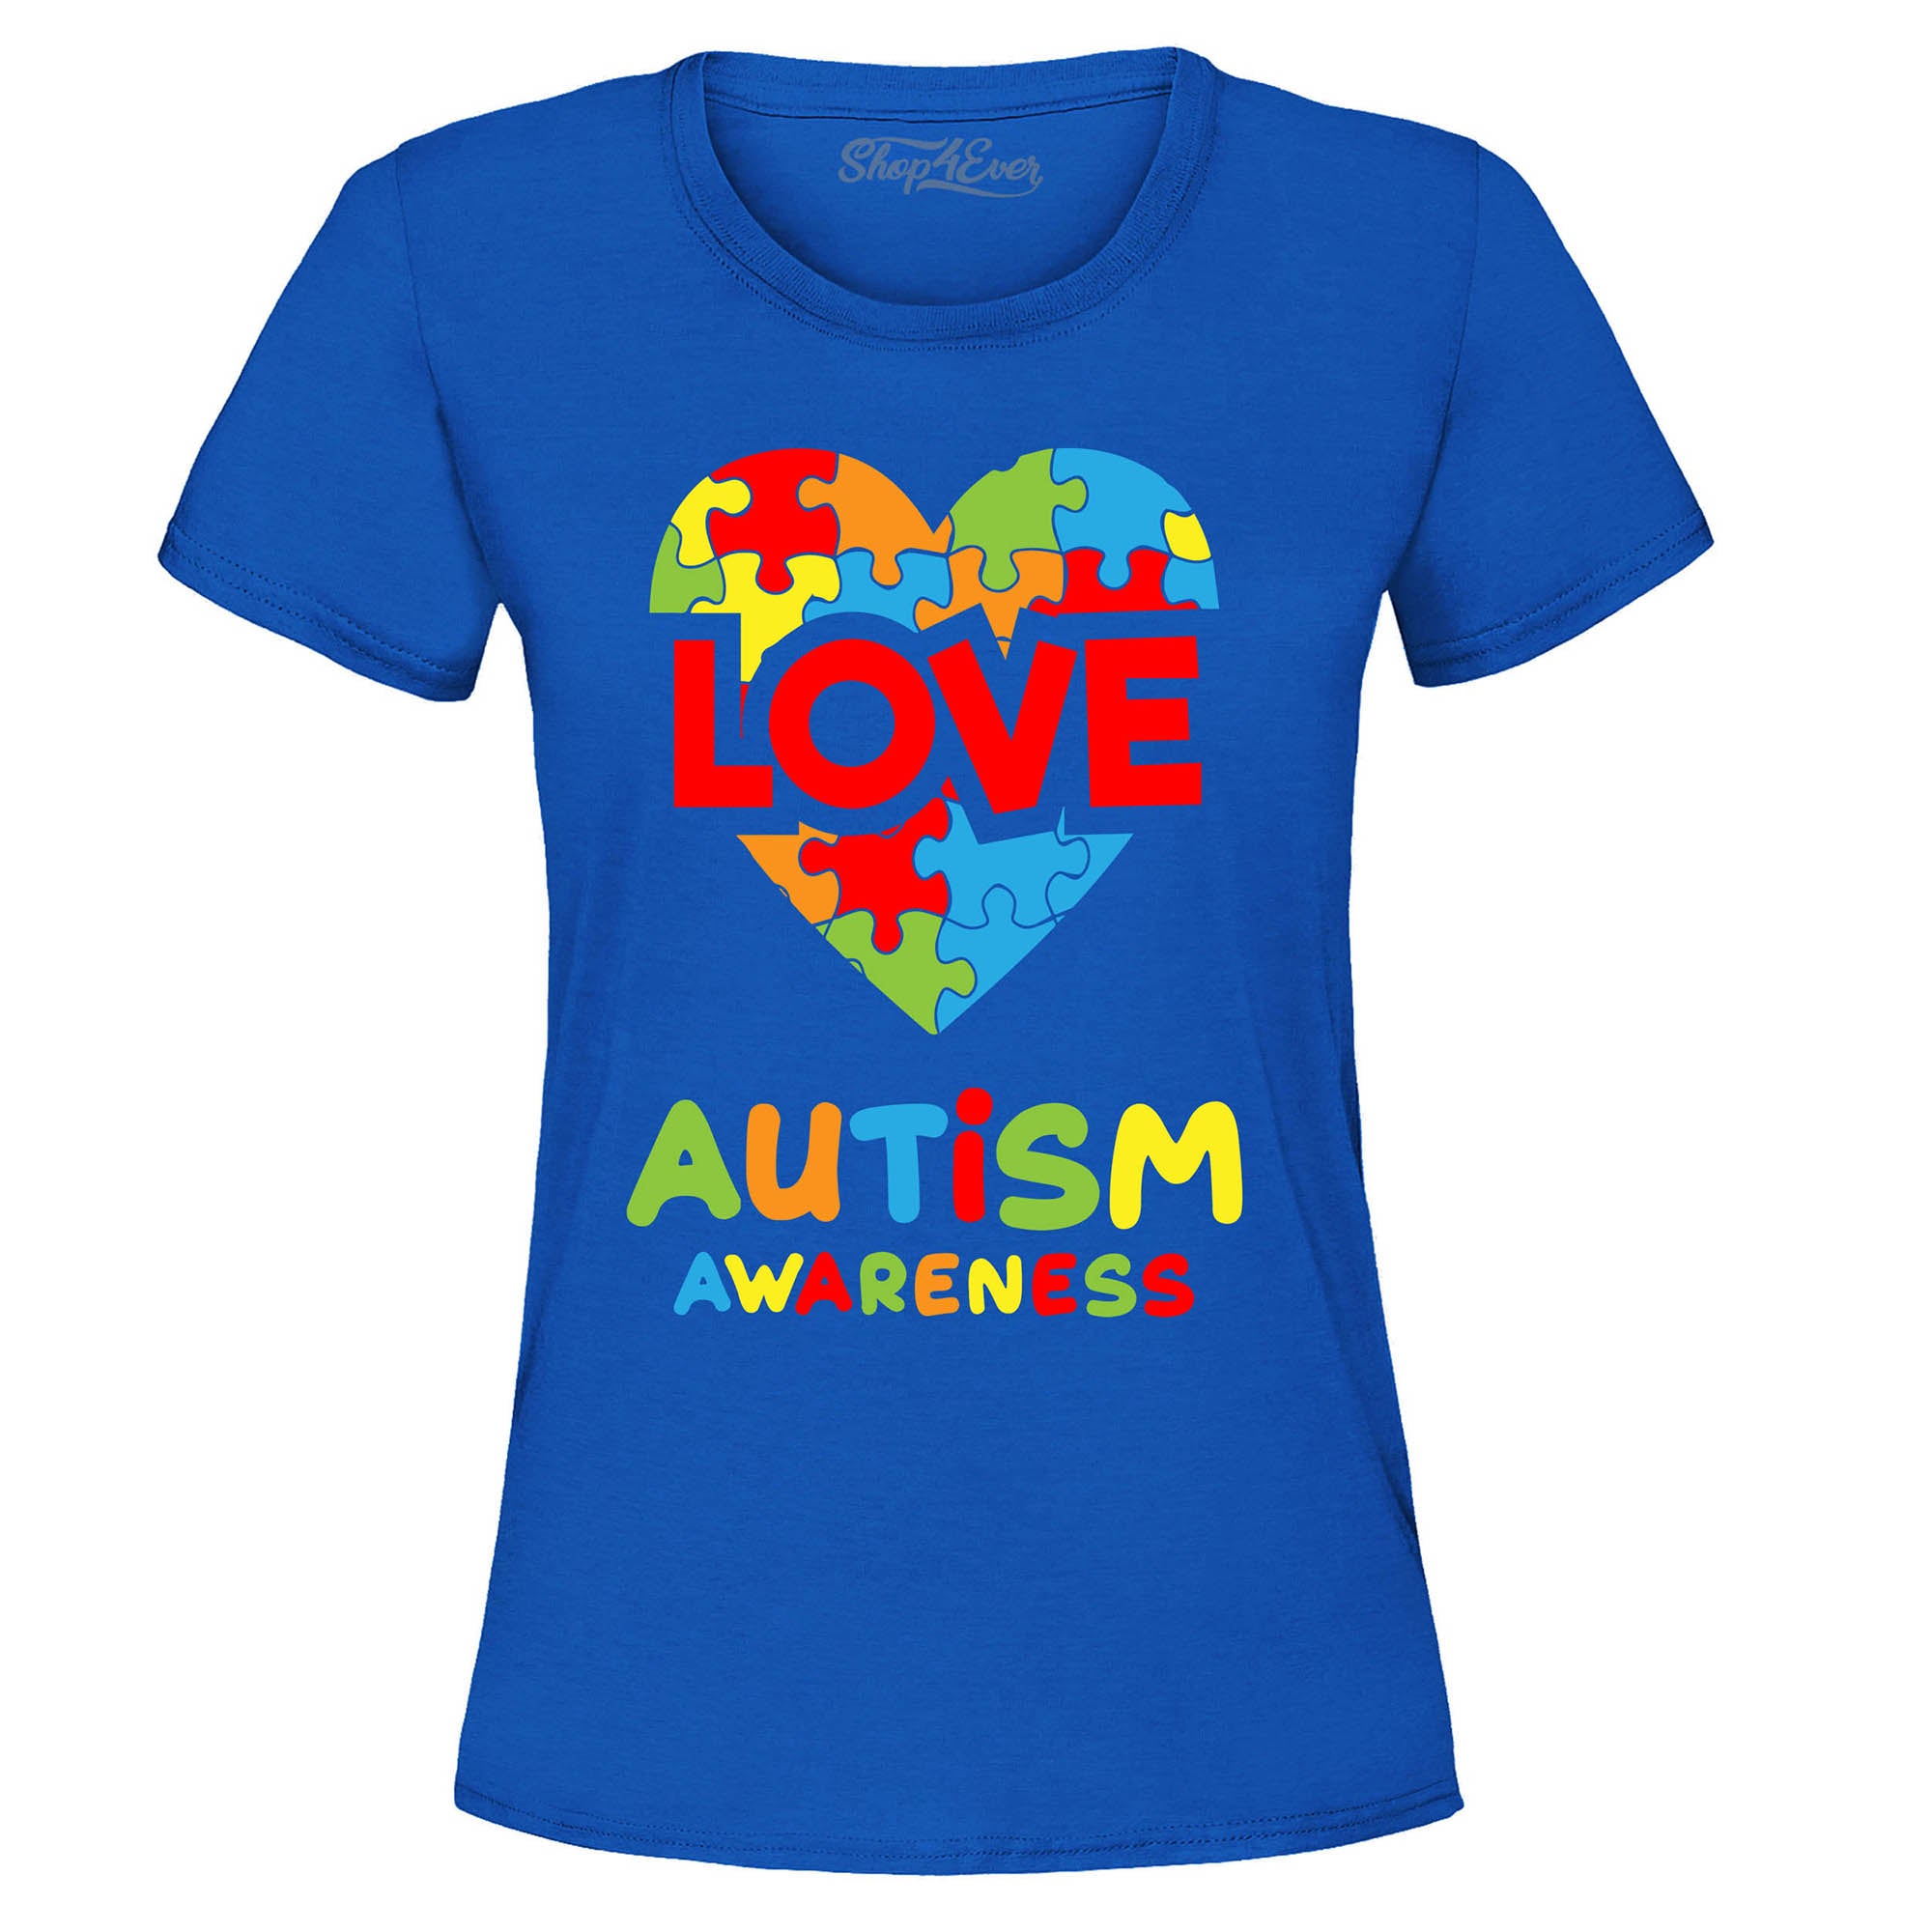 Autism Awareness Love with Puzzled Heart Women's T-Shirt